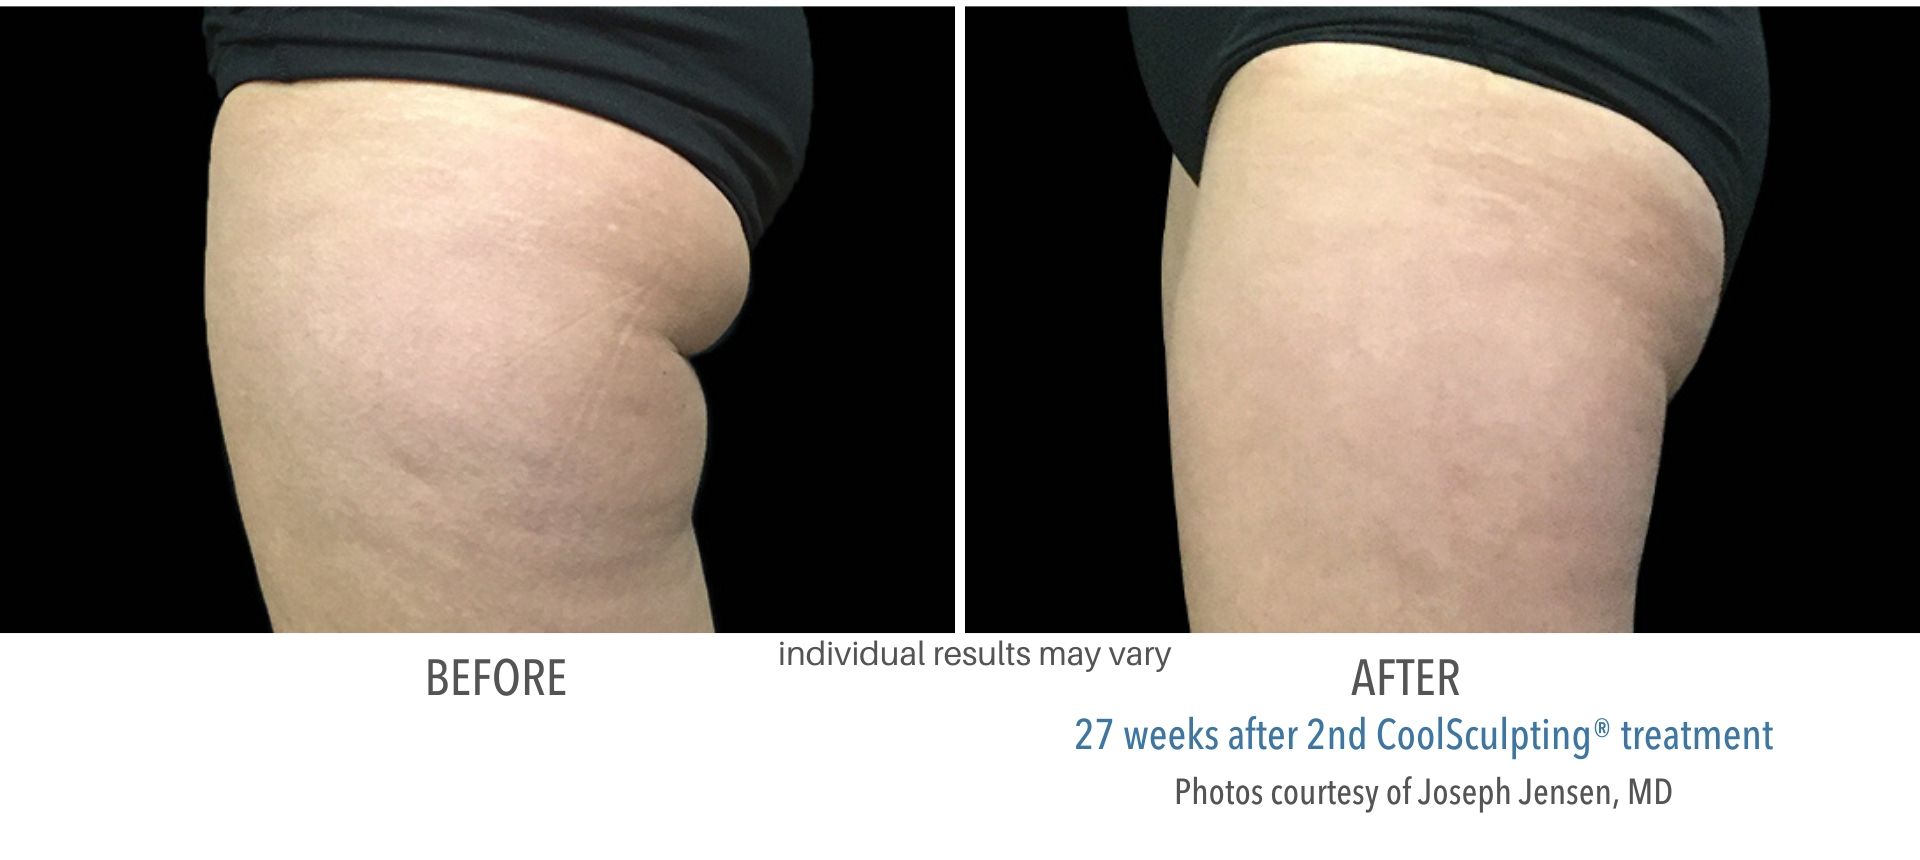 coolsculpting before and after buttocks fat Laser + Skin Institute in Chatham, NJ